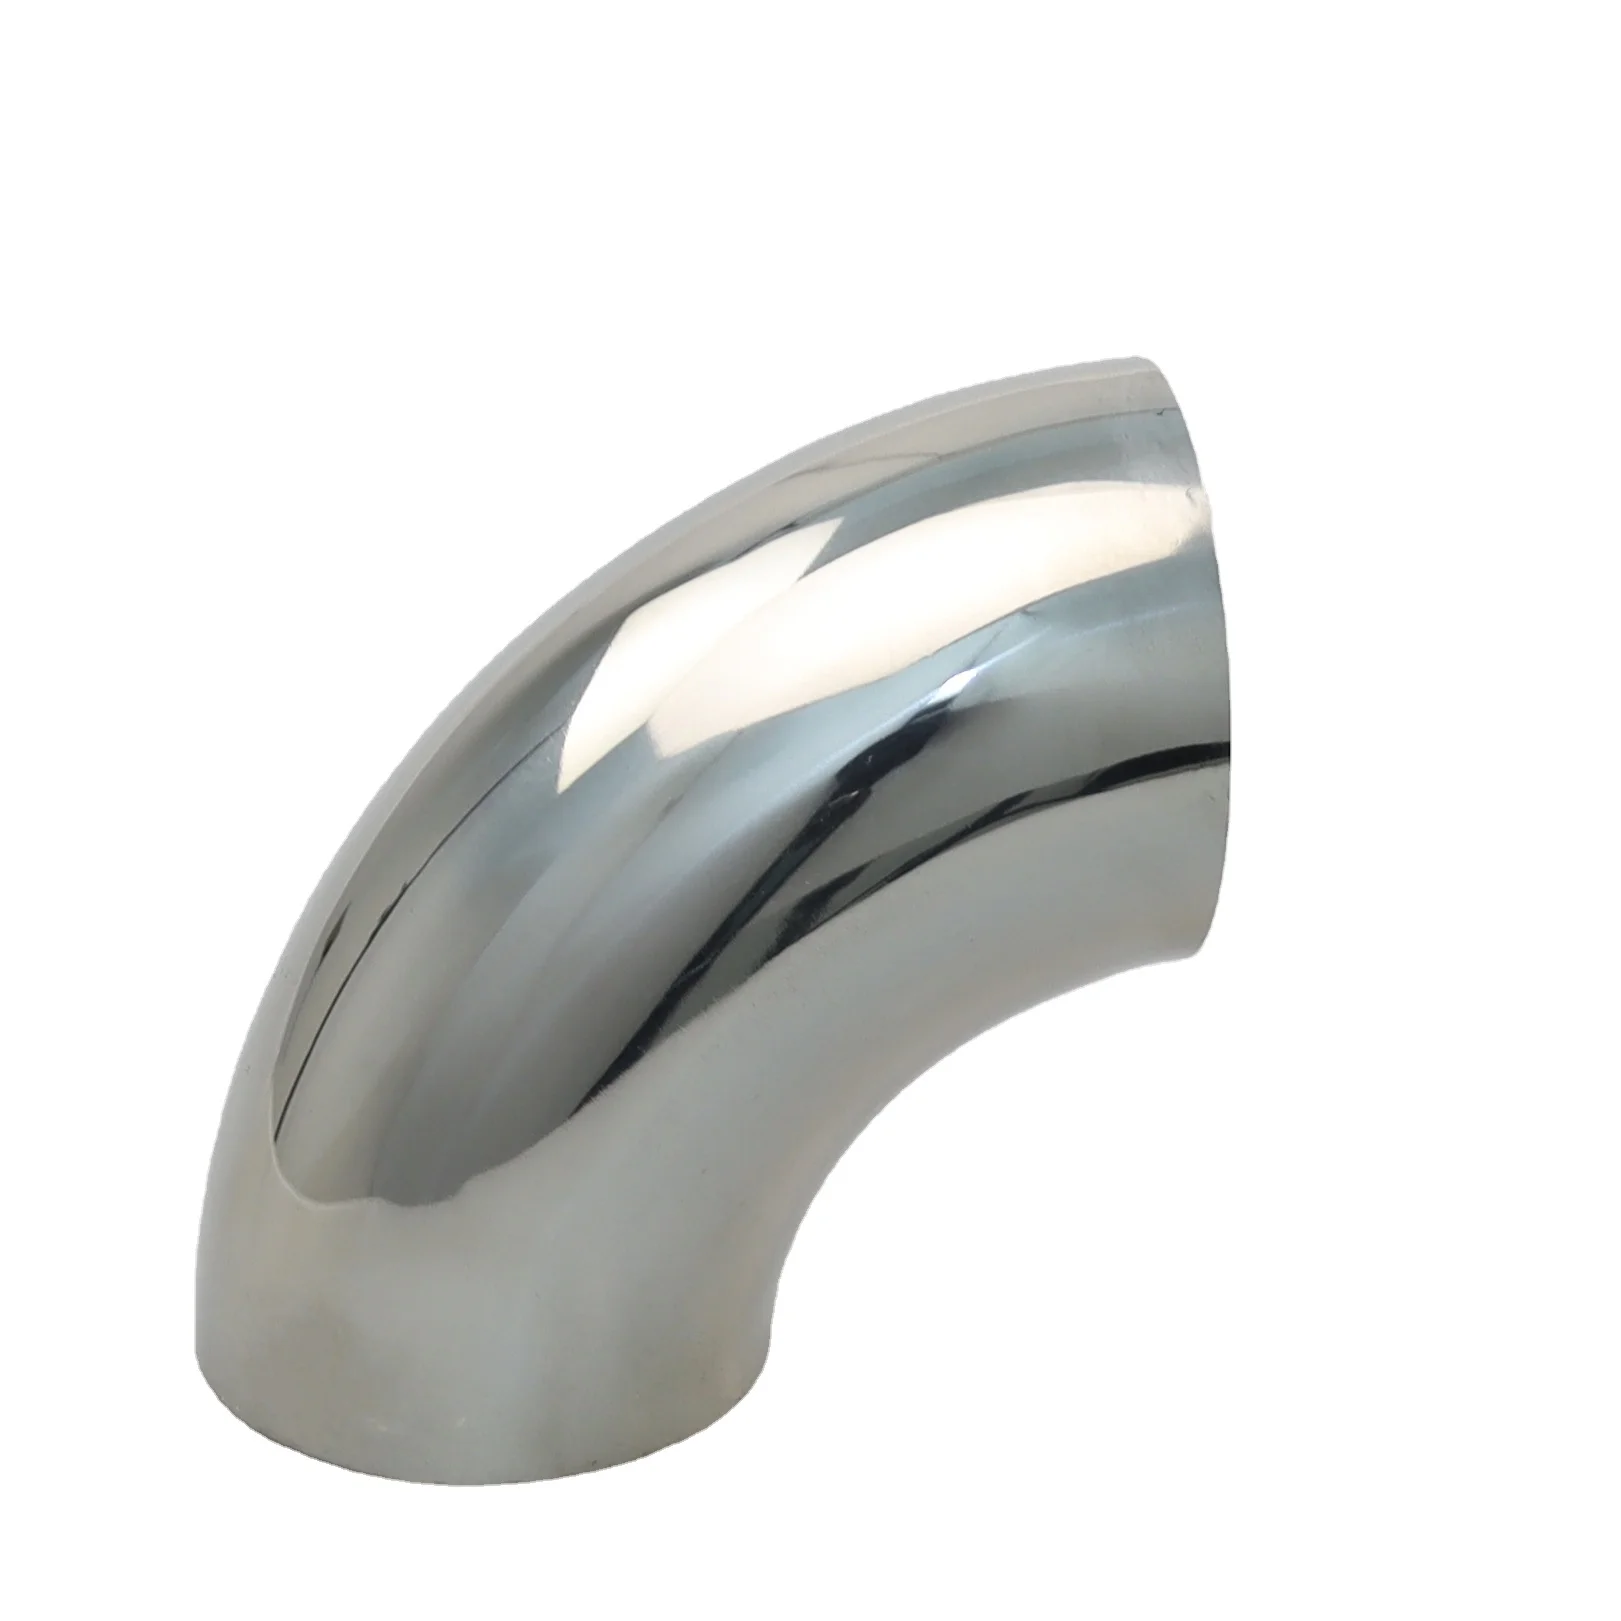 Ss Elbow 90 Degree 1 Inch 90 Degree Elbow Steel